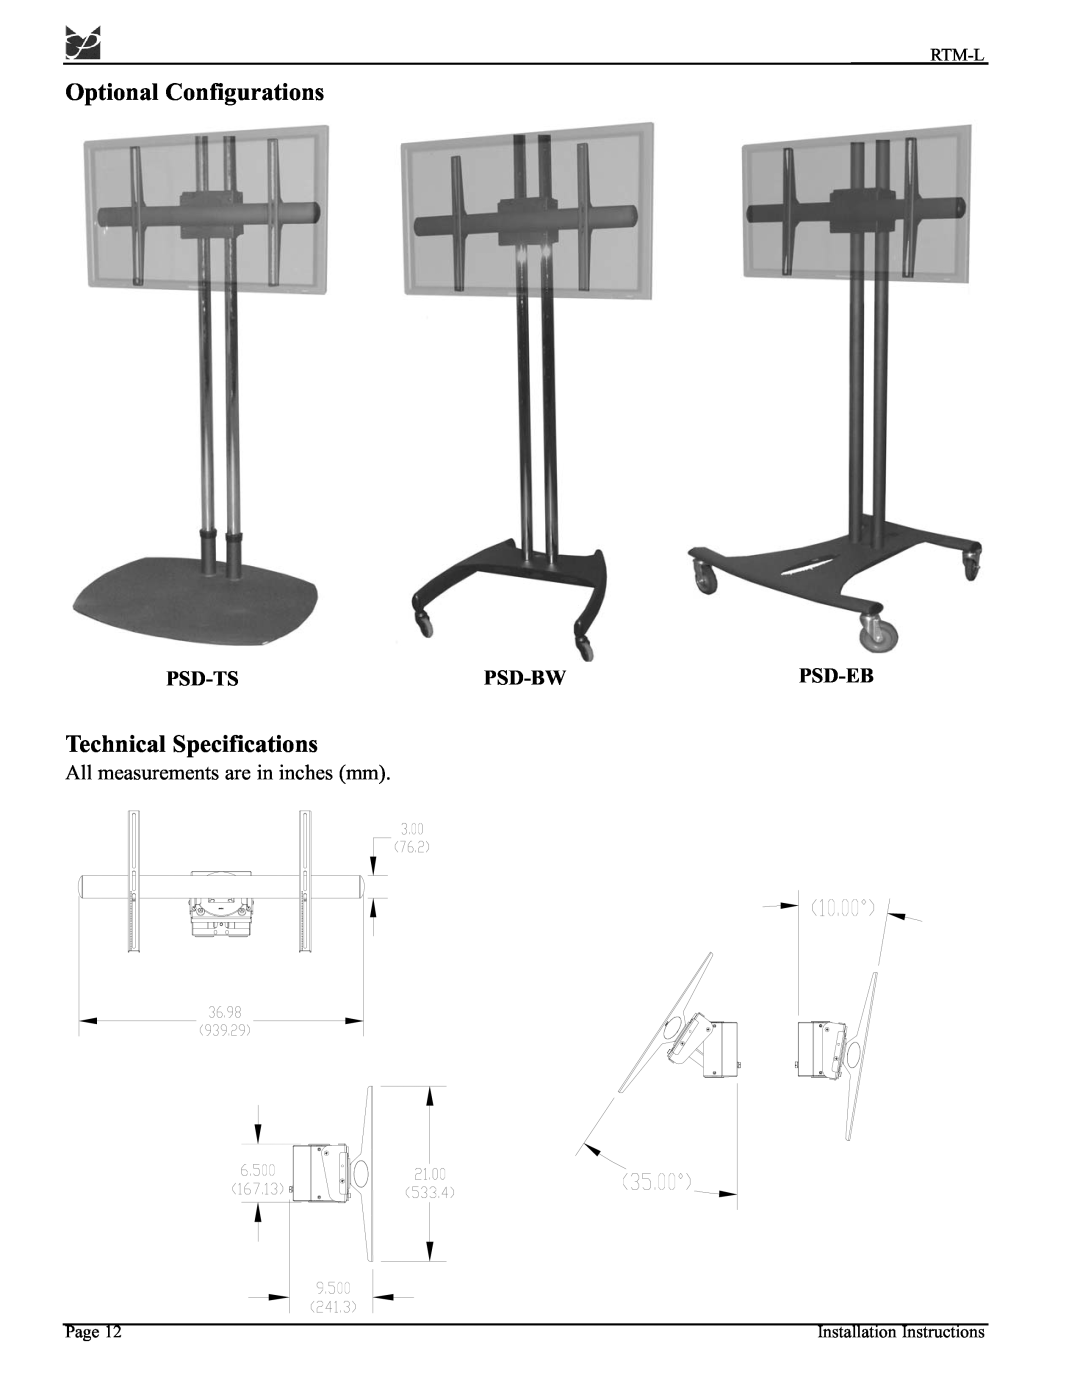 Premier Mounts PSD-BWL installation manual Optional Configurations, Technical Specifications, Psd-Ts, Psd-Bw, Psd-Eb 